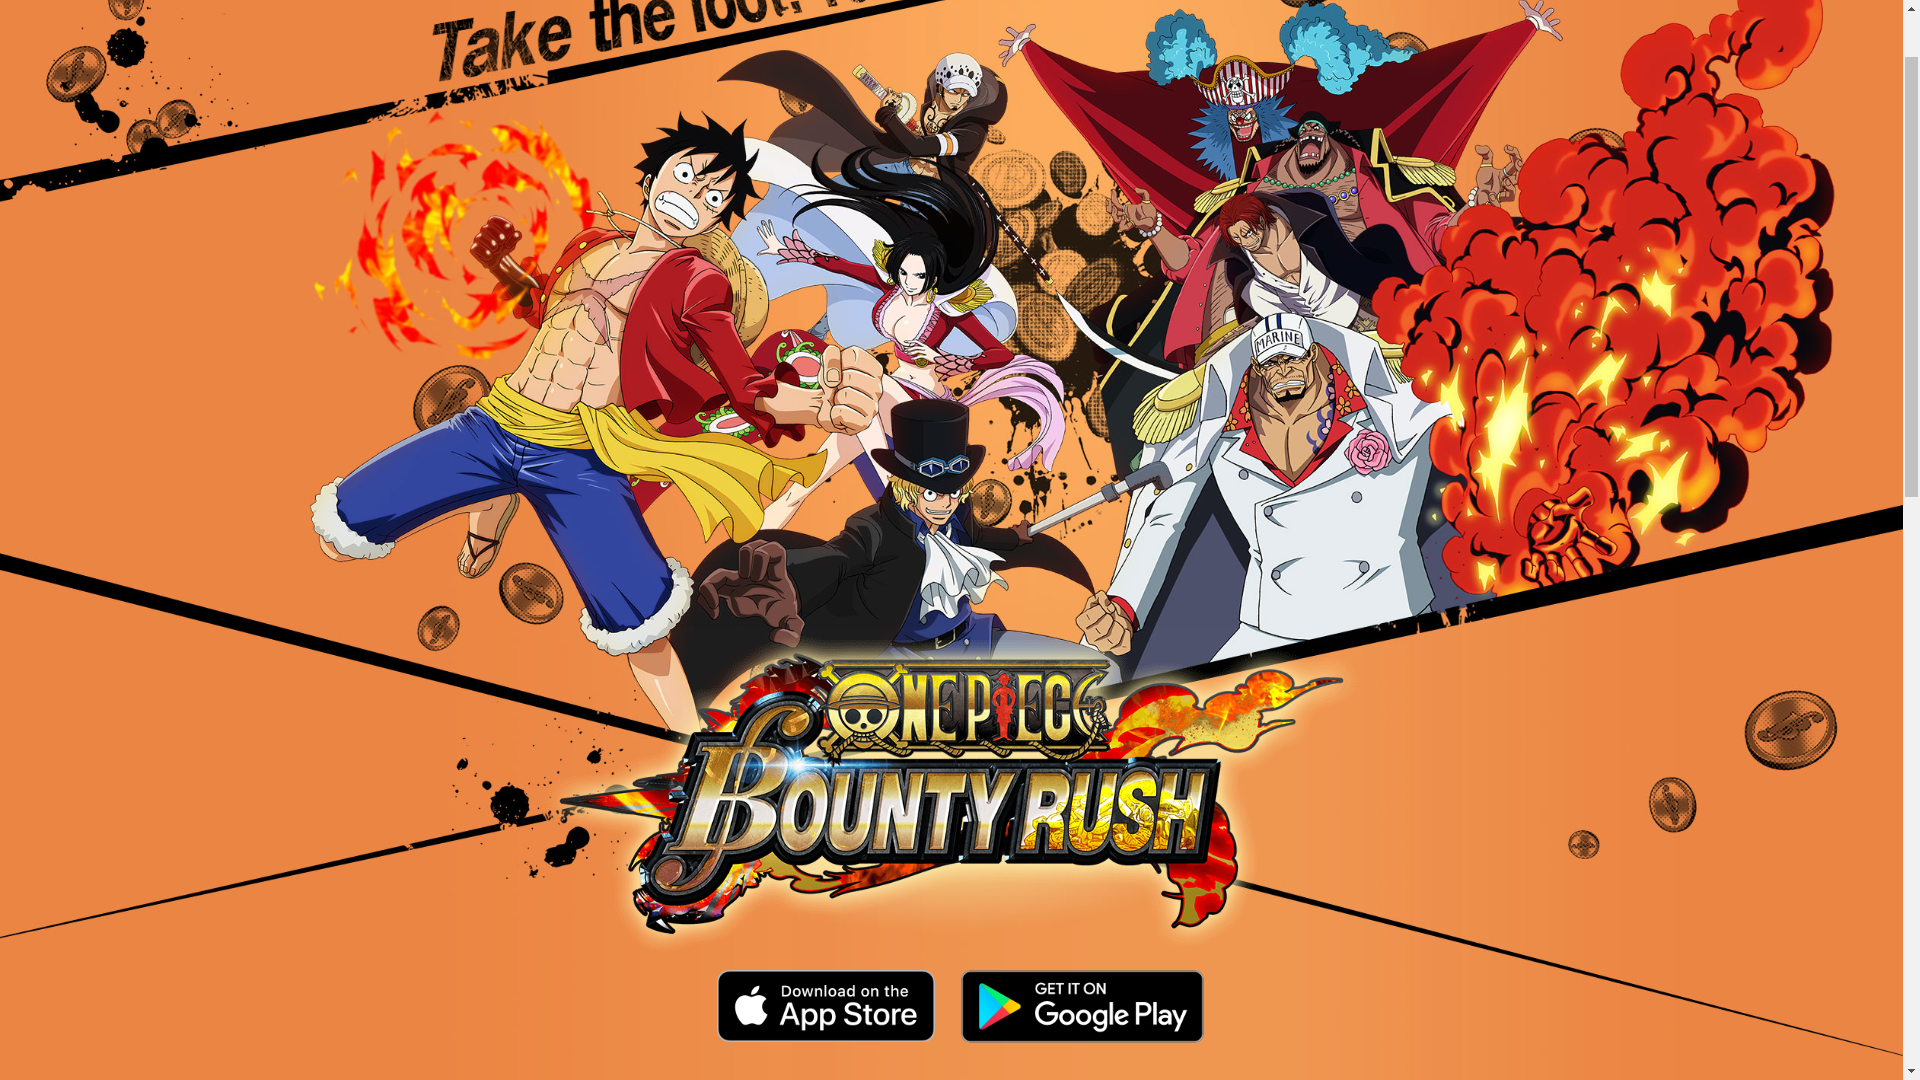 Mobile, One Piece Bounty Rush Now Available For Mobile Devices